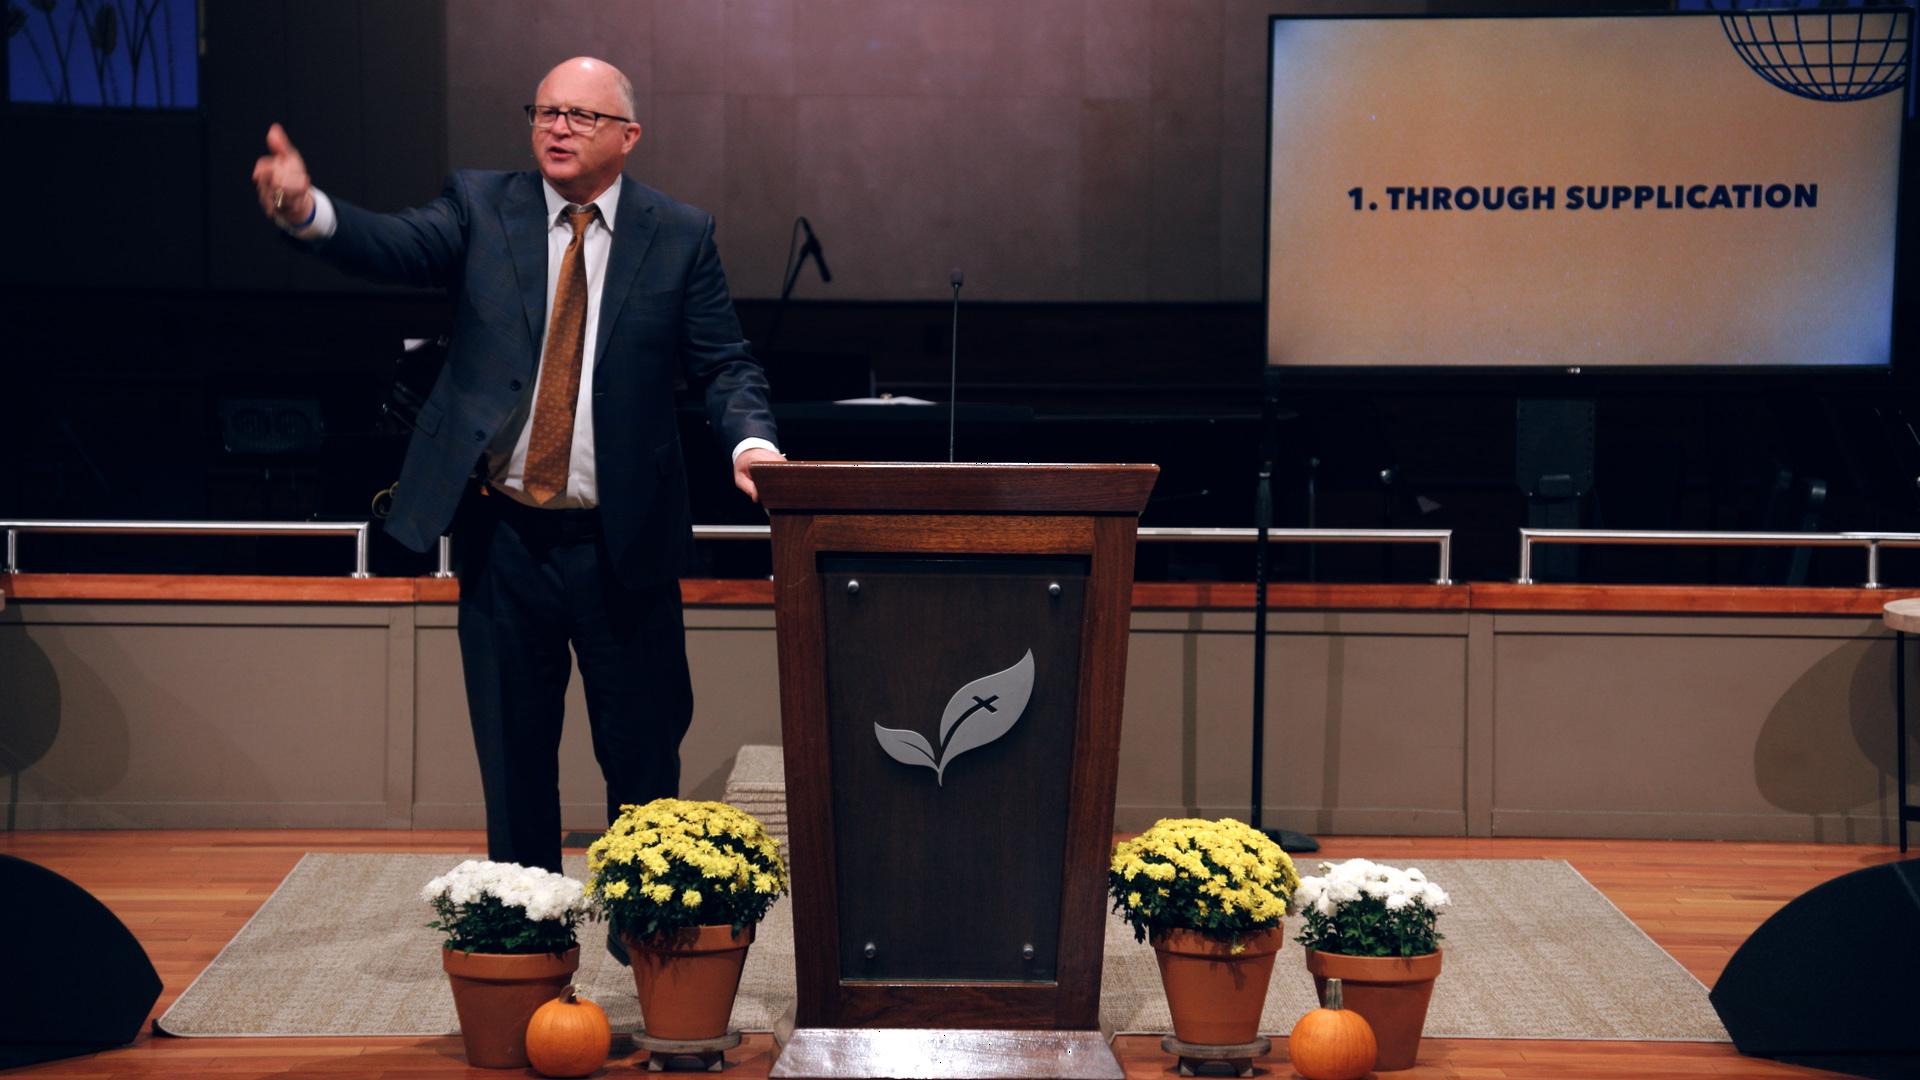 Pastor Paul Chappell: How A Church Encourages Missionaries and Reaches the World